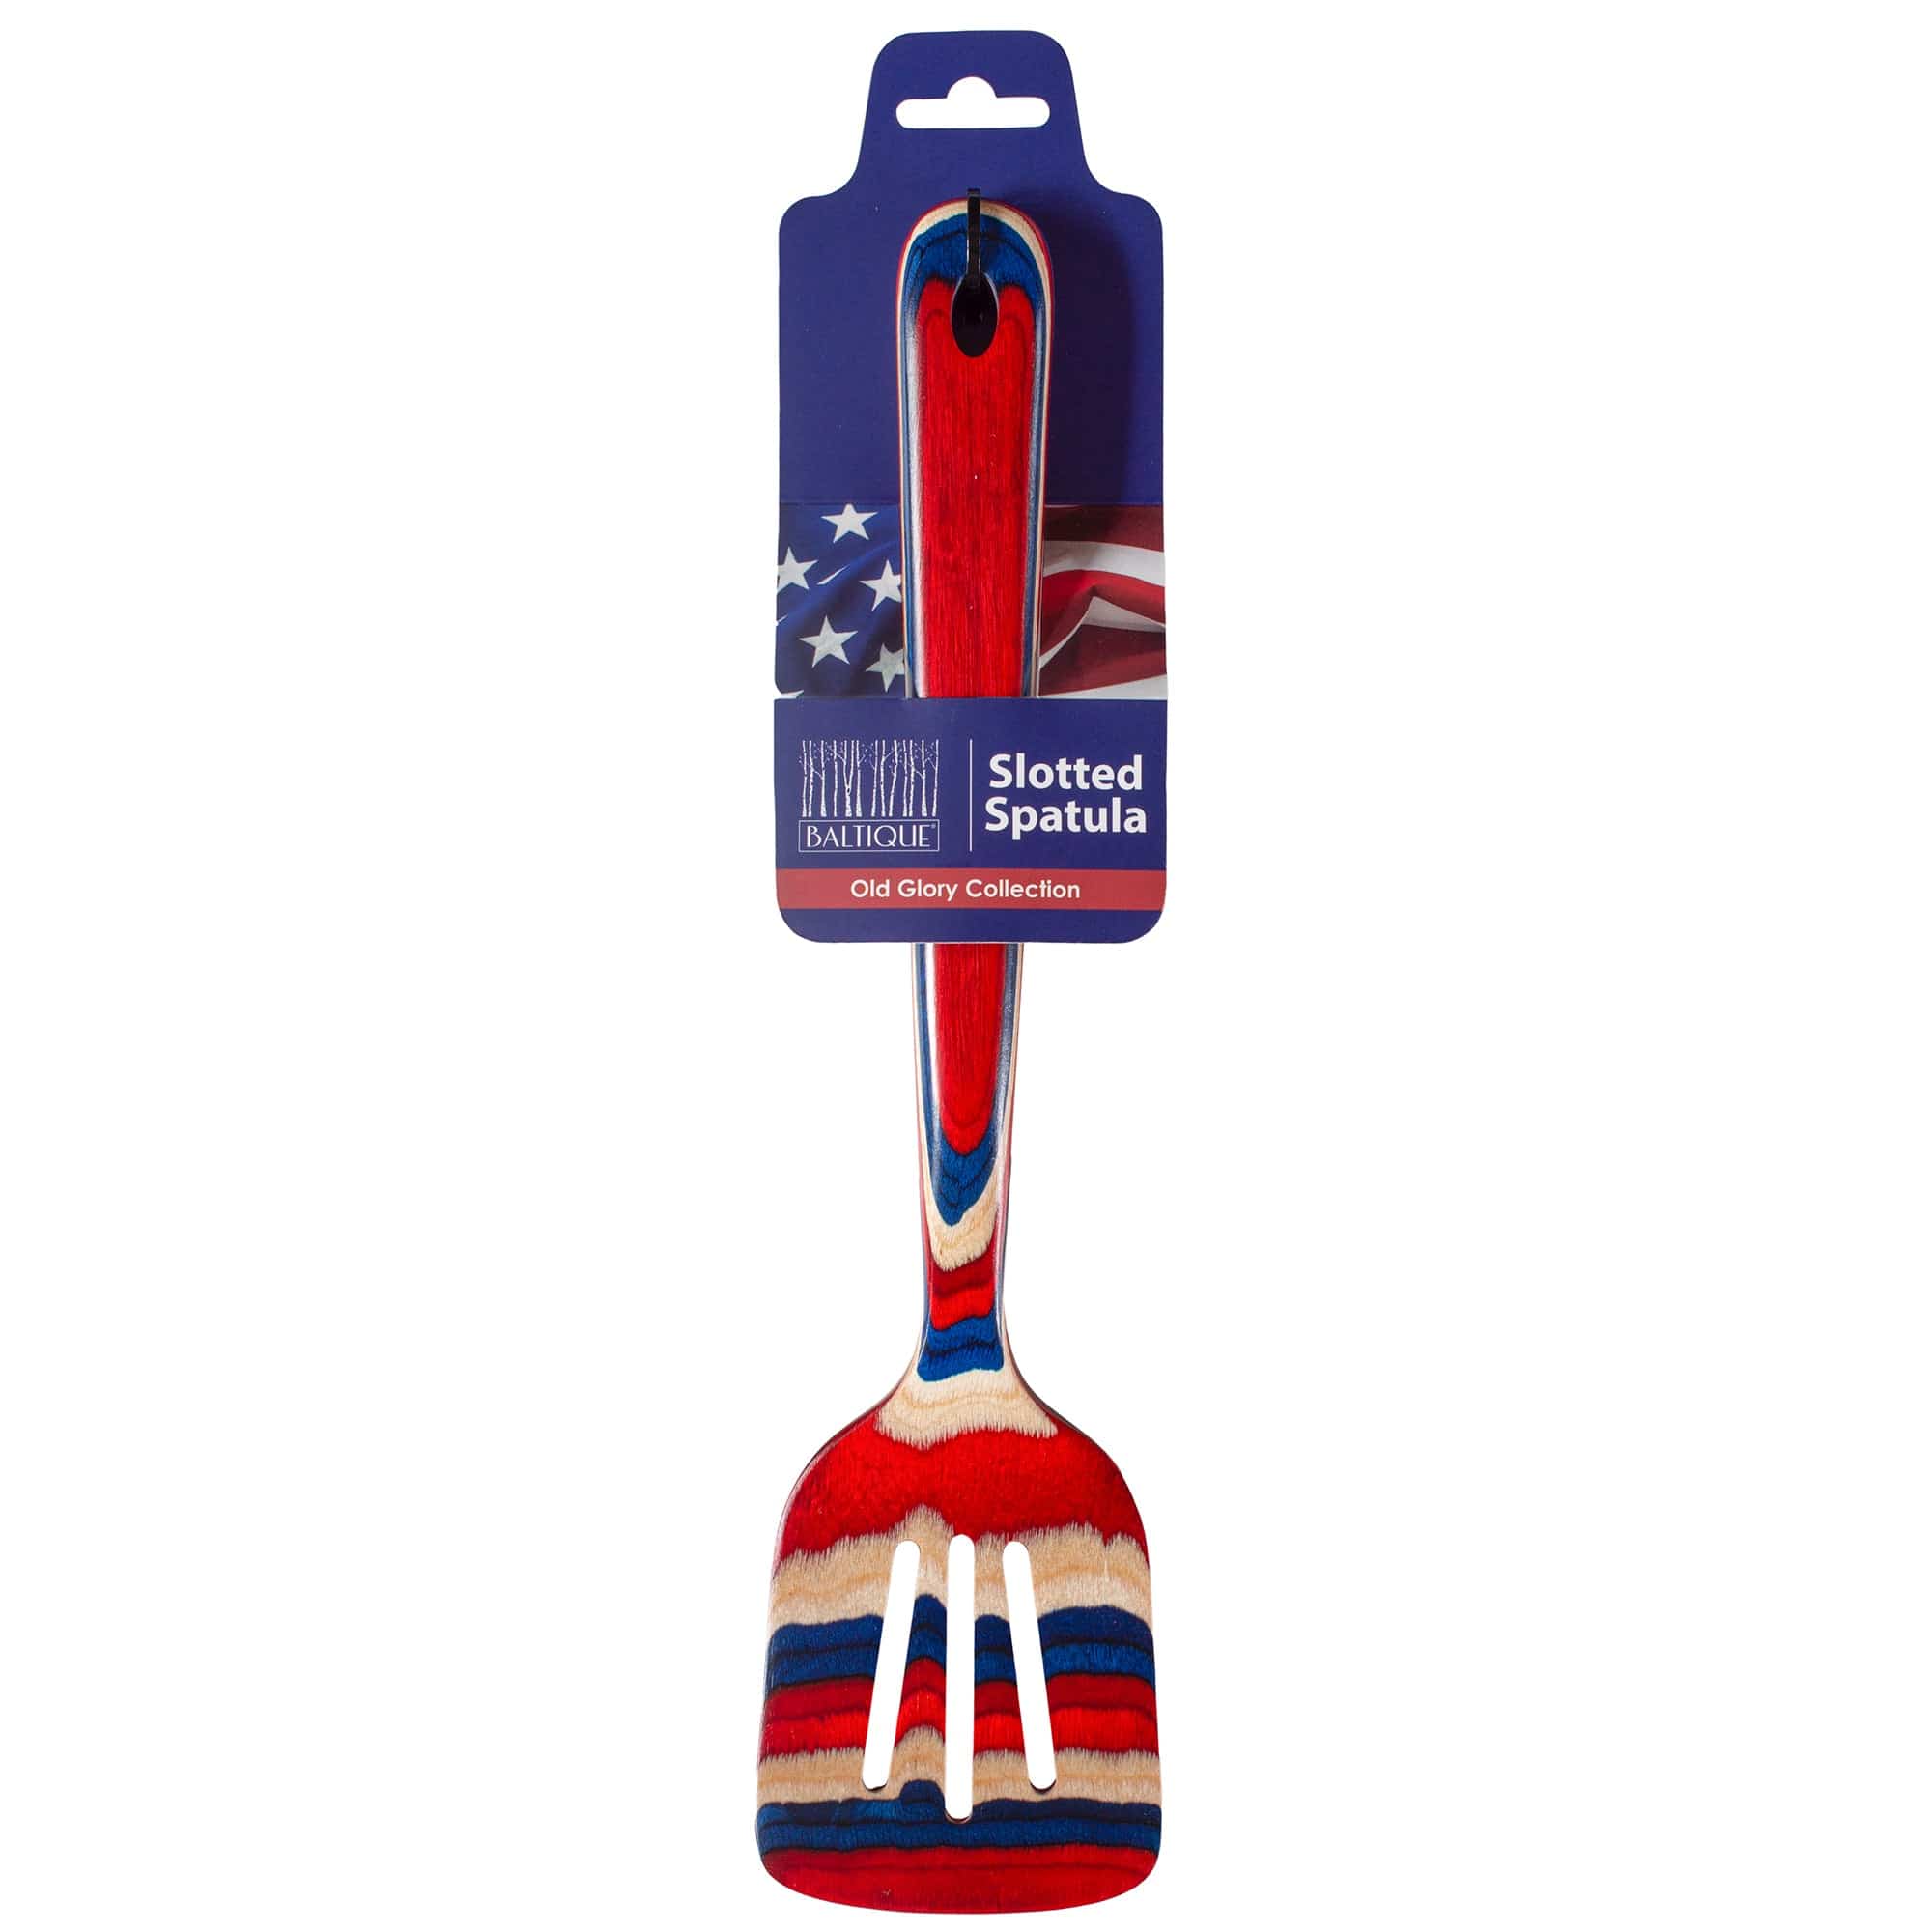 Totally Bamboo Baltique® Old Glory Collection Slotted Spatula